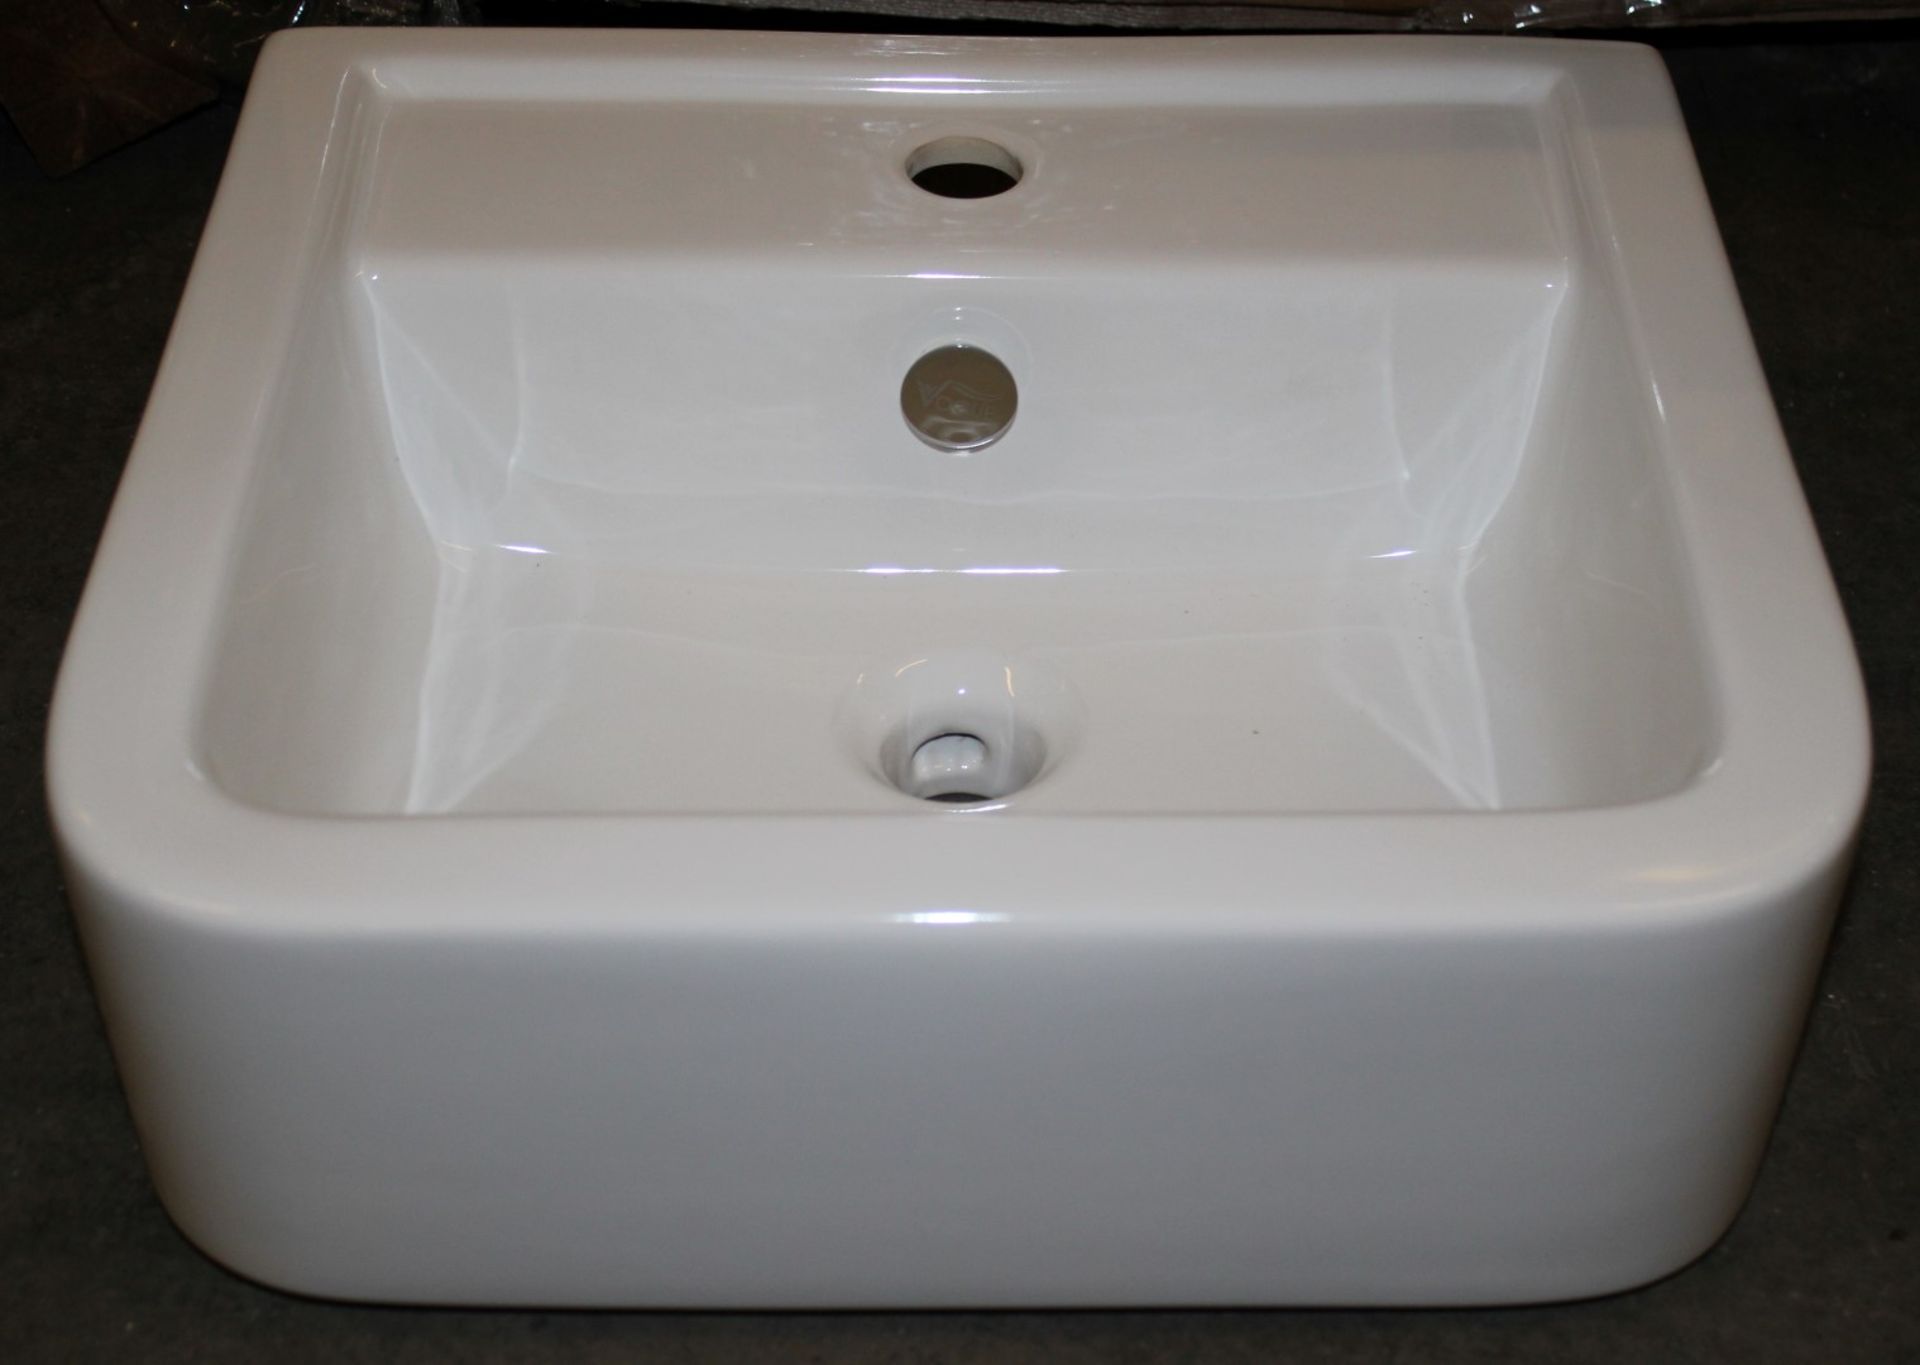 4 x Vogue Bathrooms OPTIONS Single Tap Hole SINK BASINS With Pedestals - 450mm Width - Brand New - Image 5 of 6